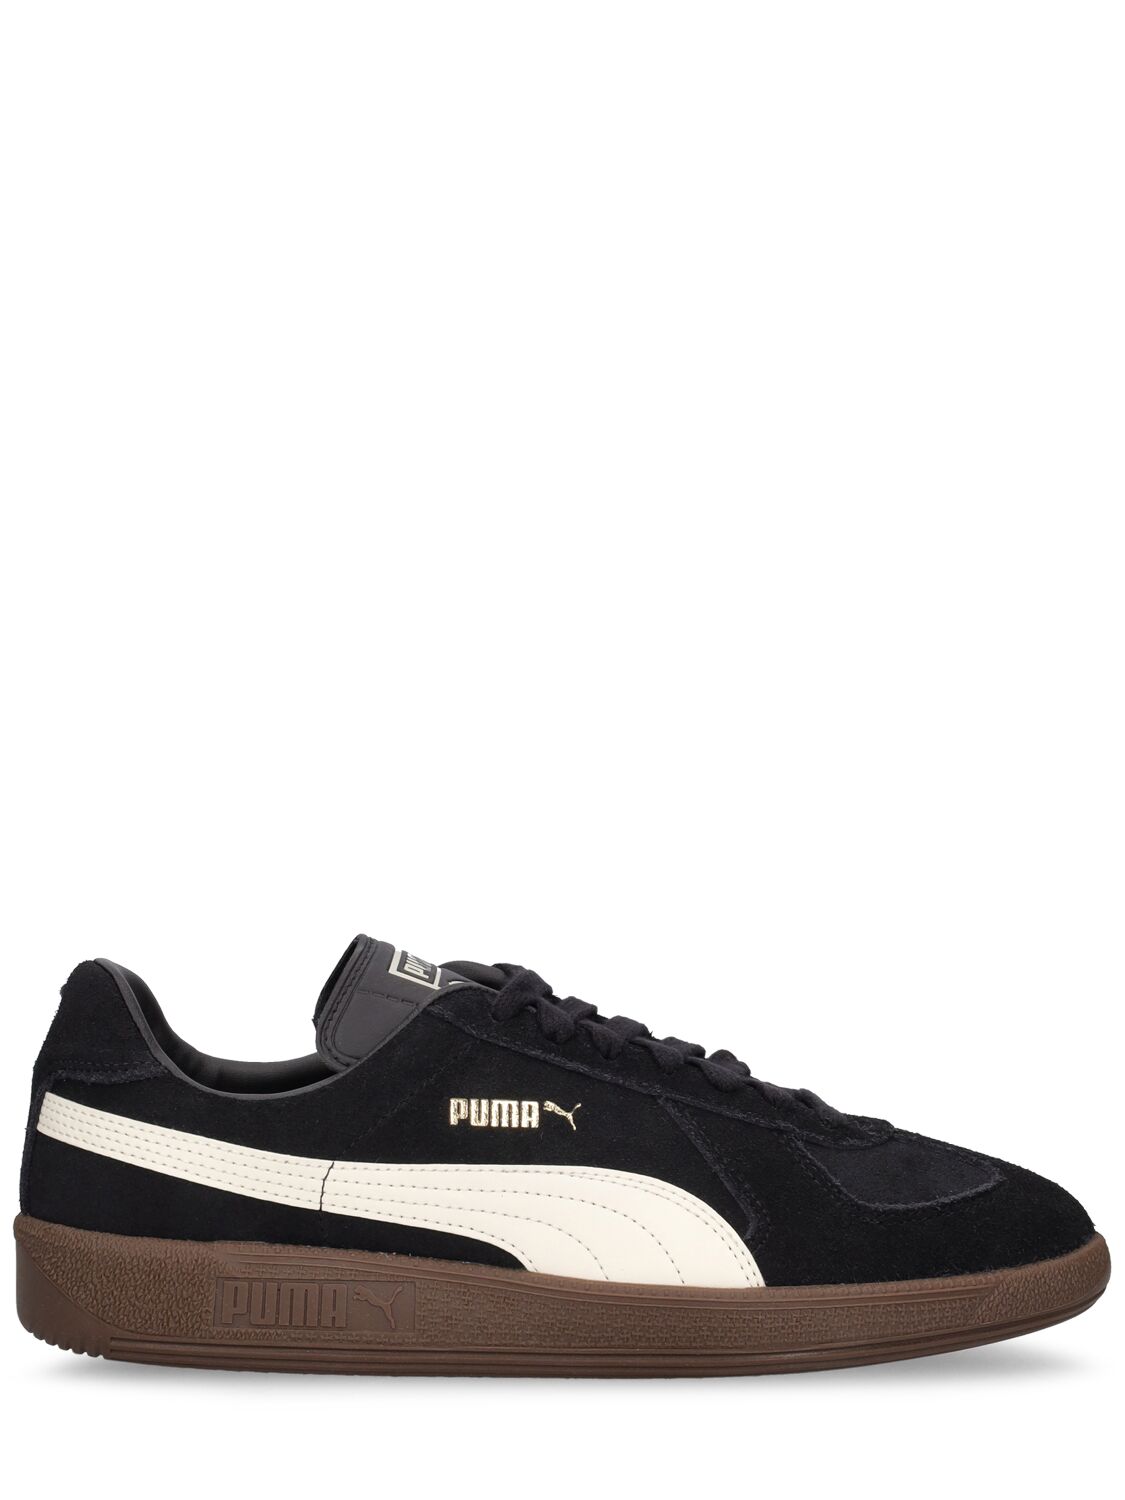 Army Trainer Suede Sneakers – WOMEN > SHOES > SNEAKERS